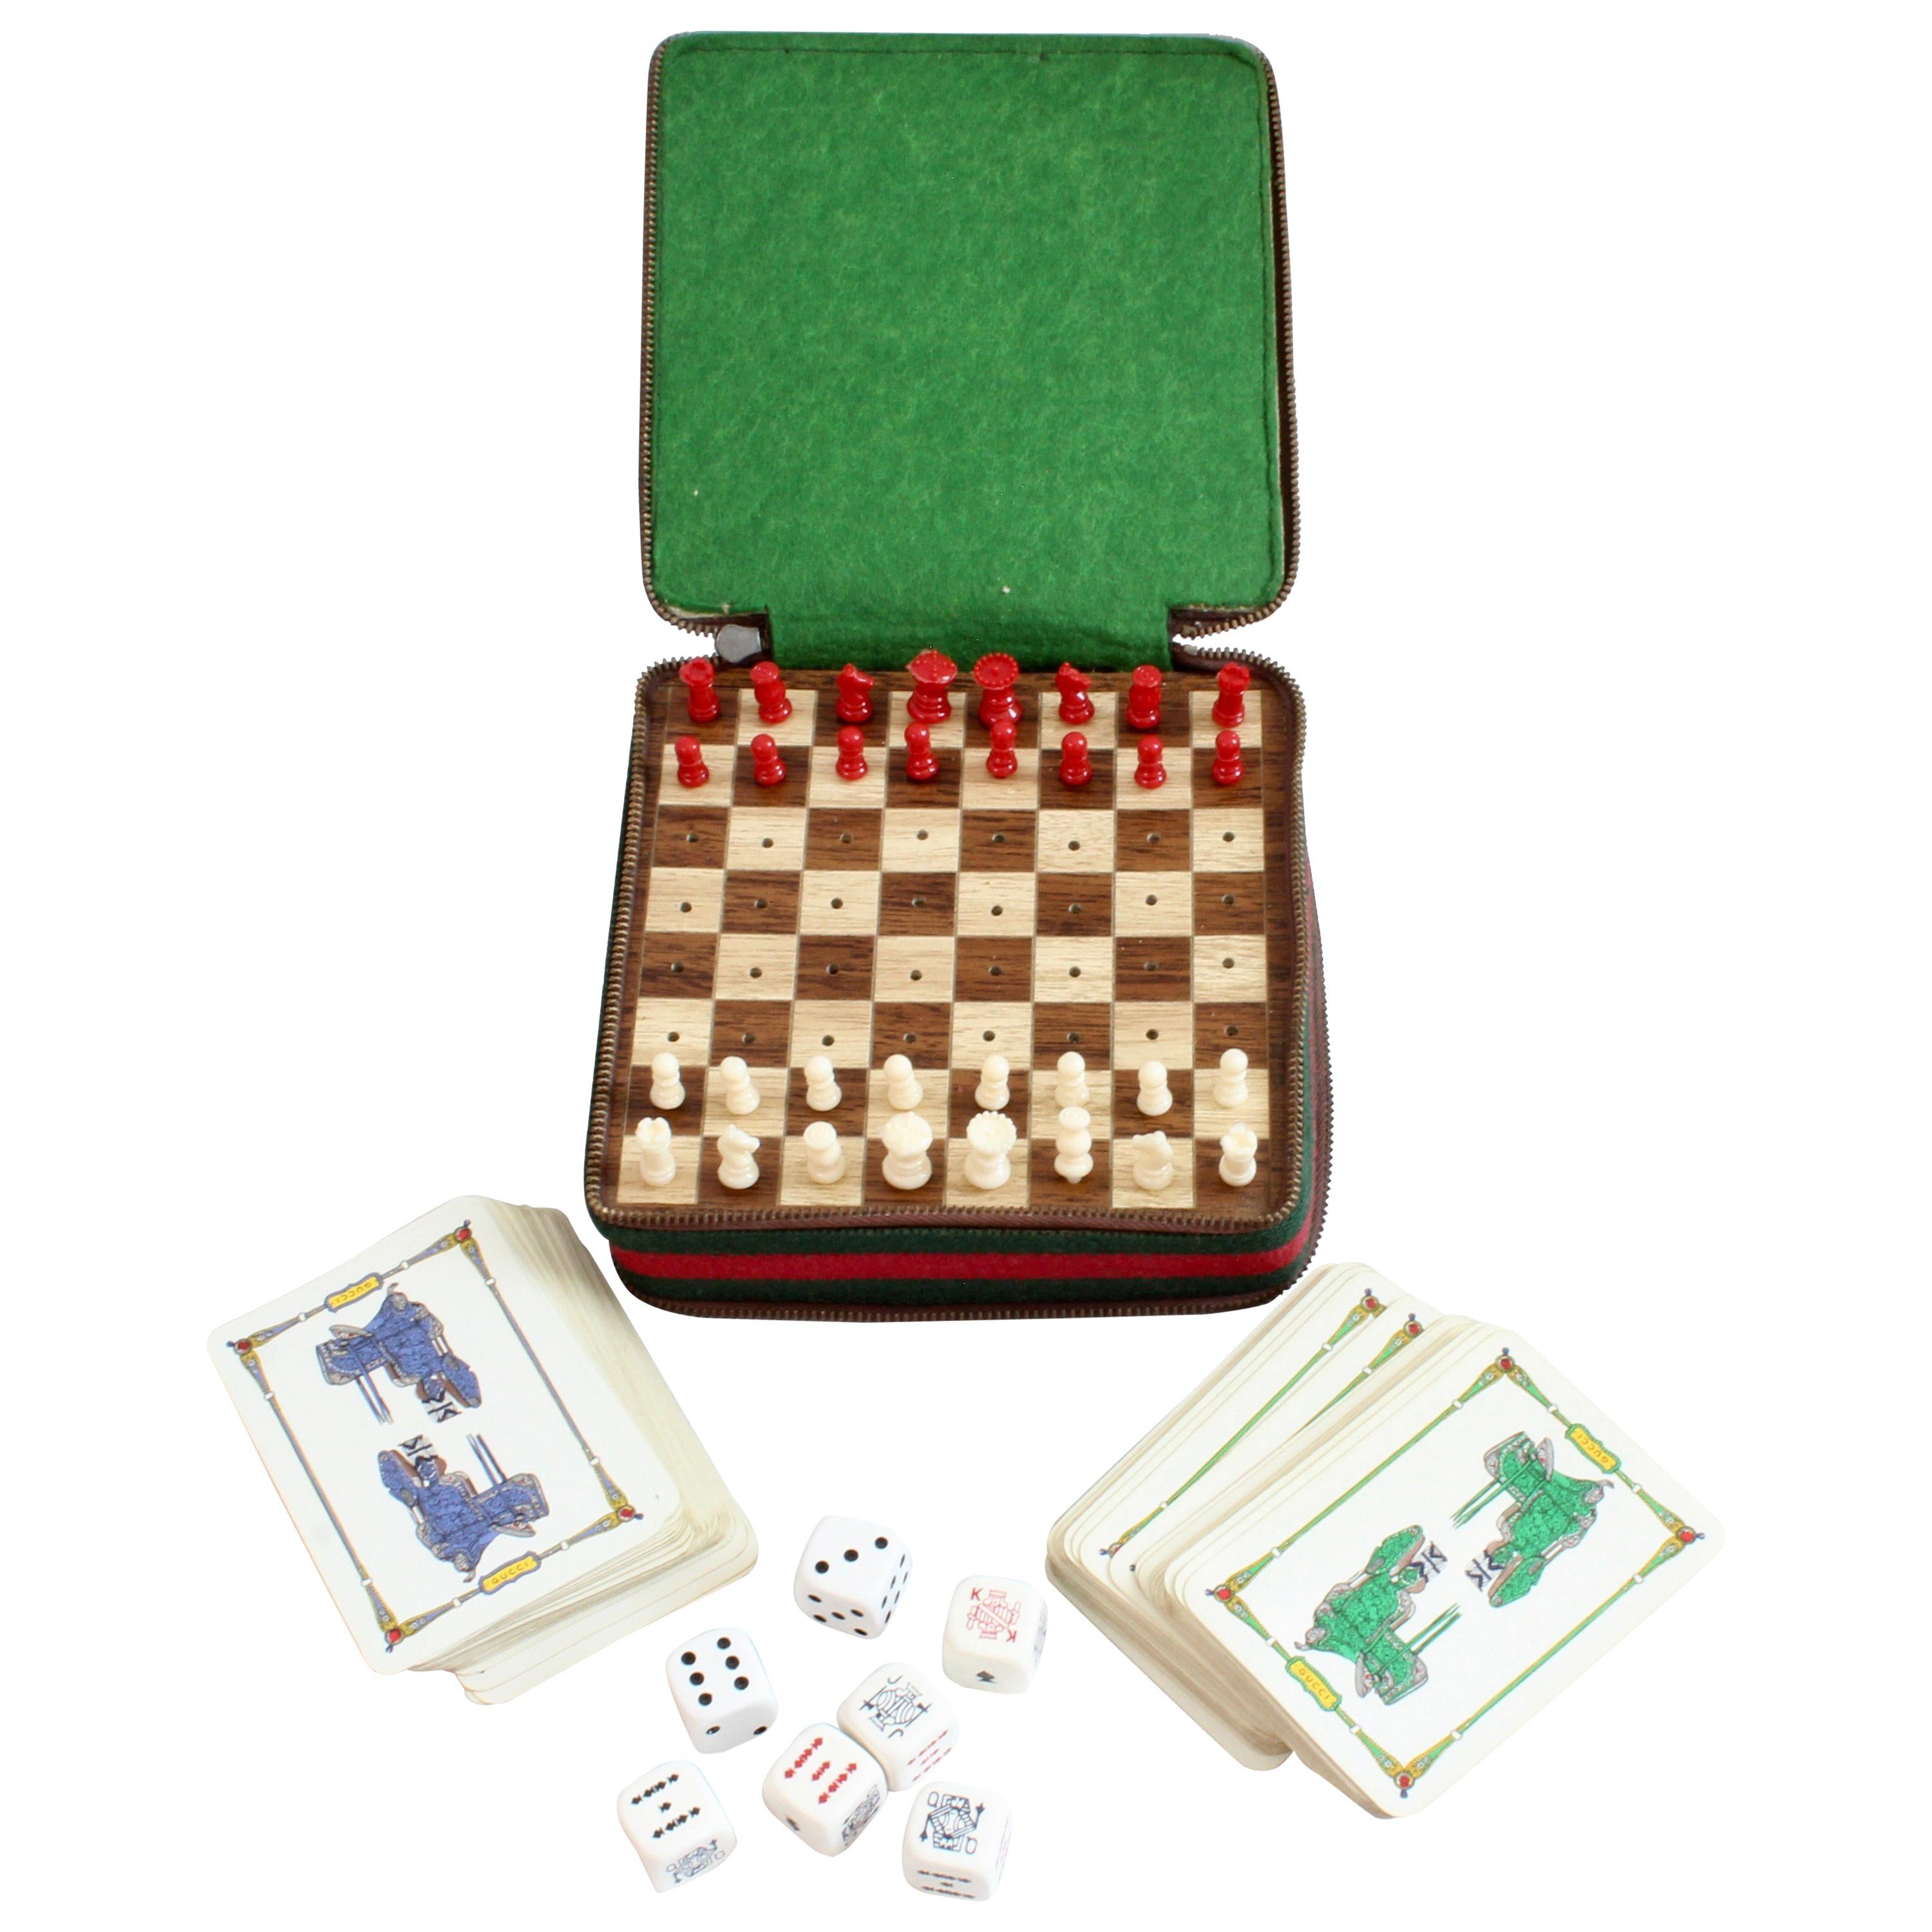 Rare Vintage GUCCI Travel Chess Set at Rice and Beans Vintage